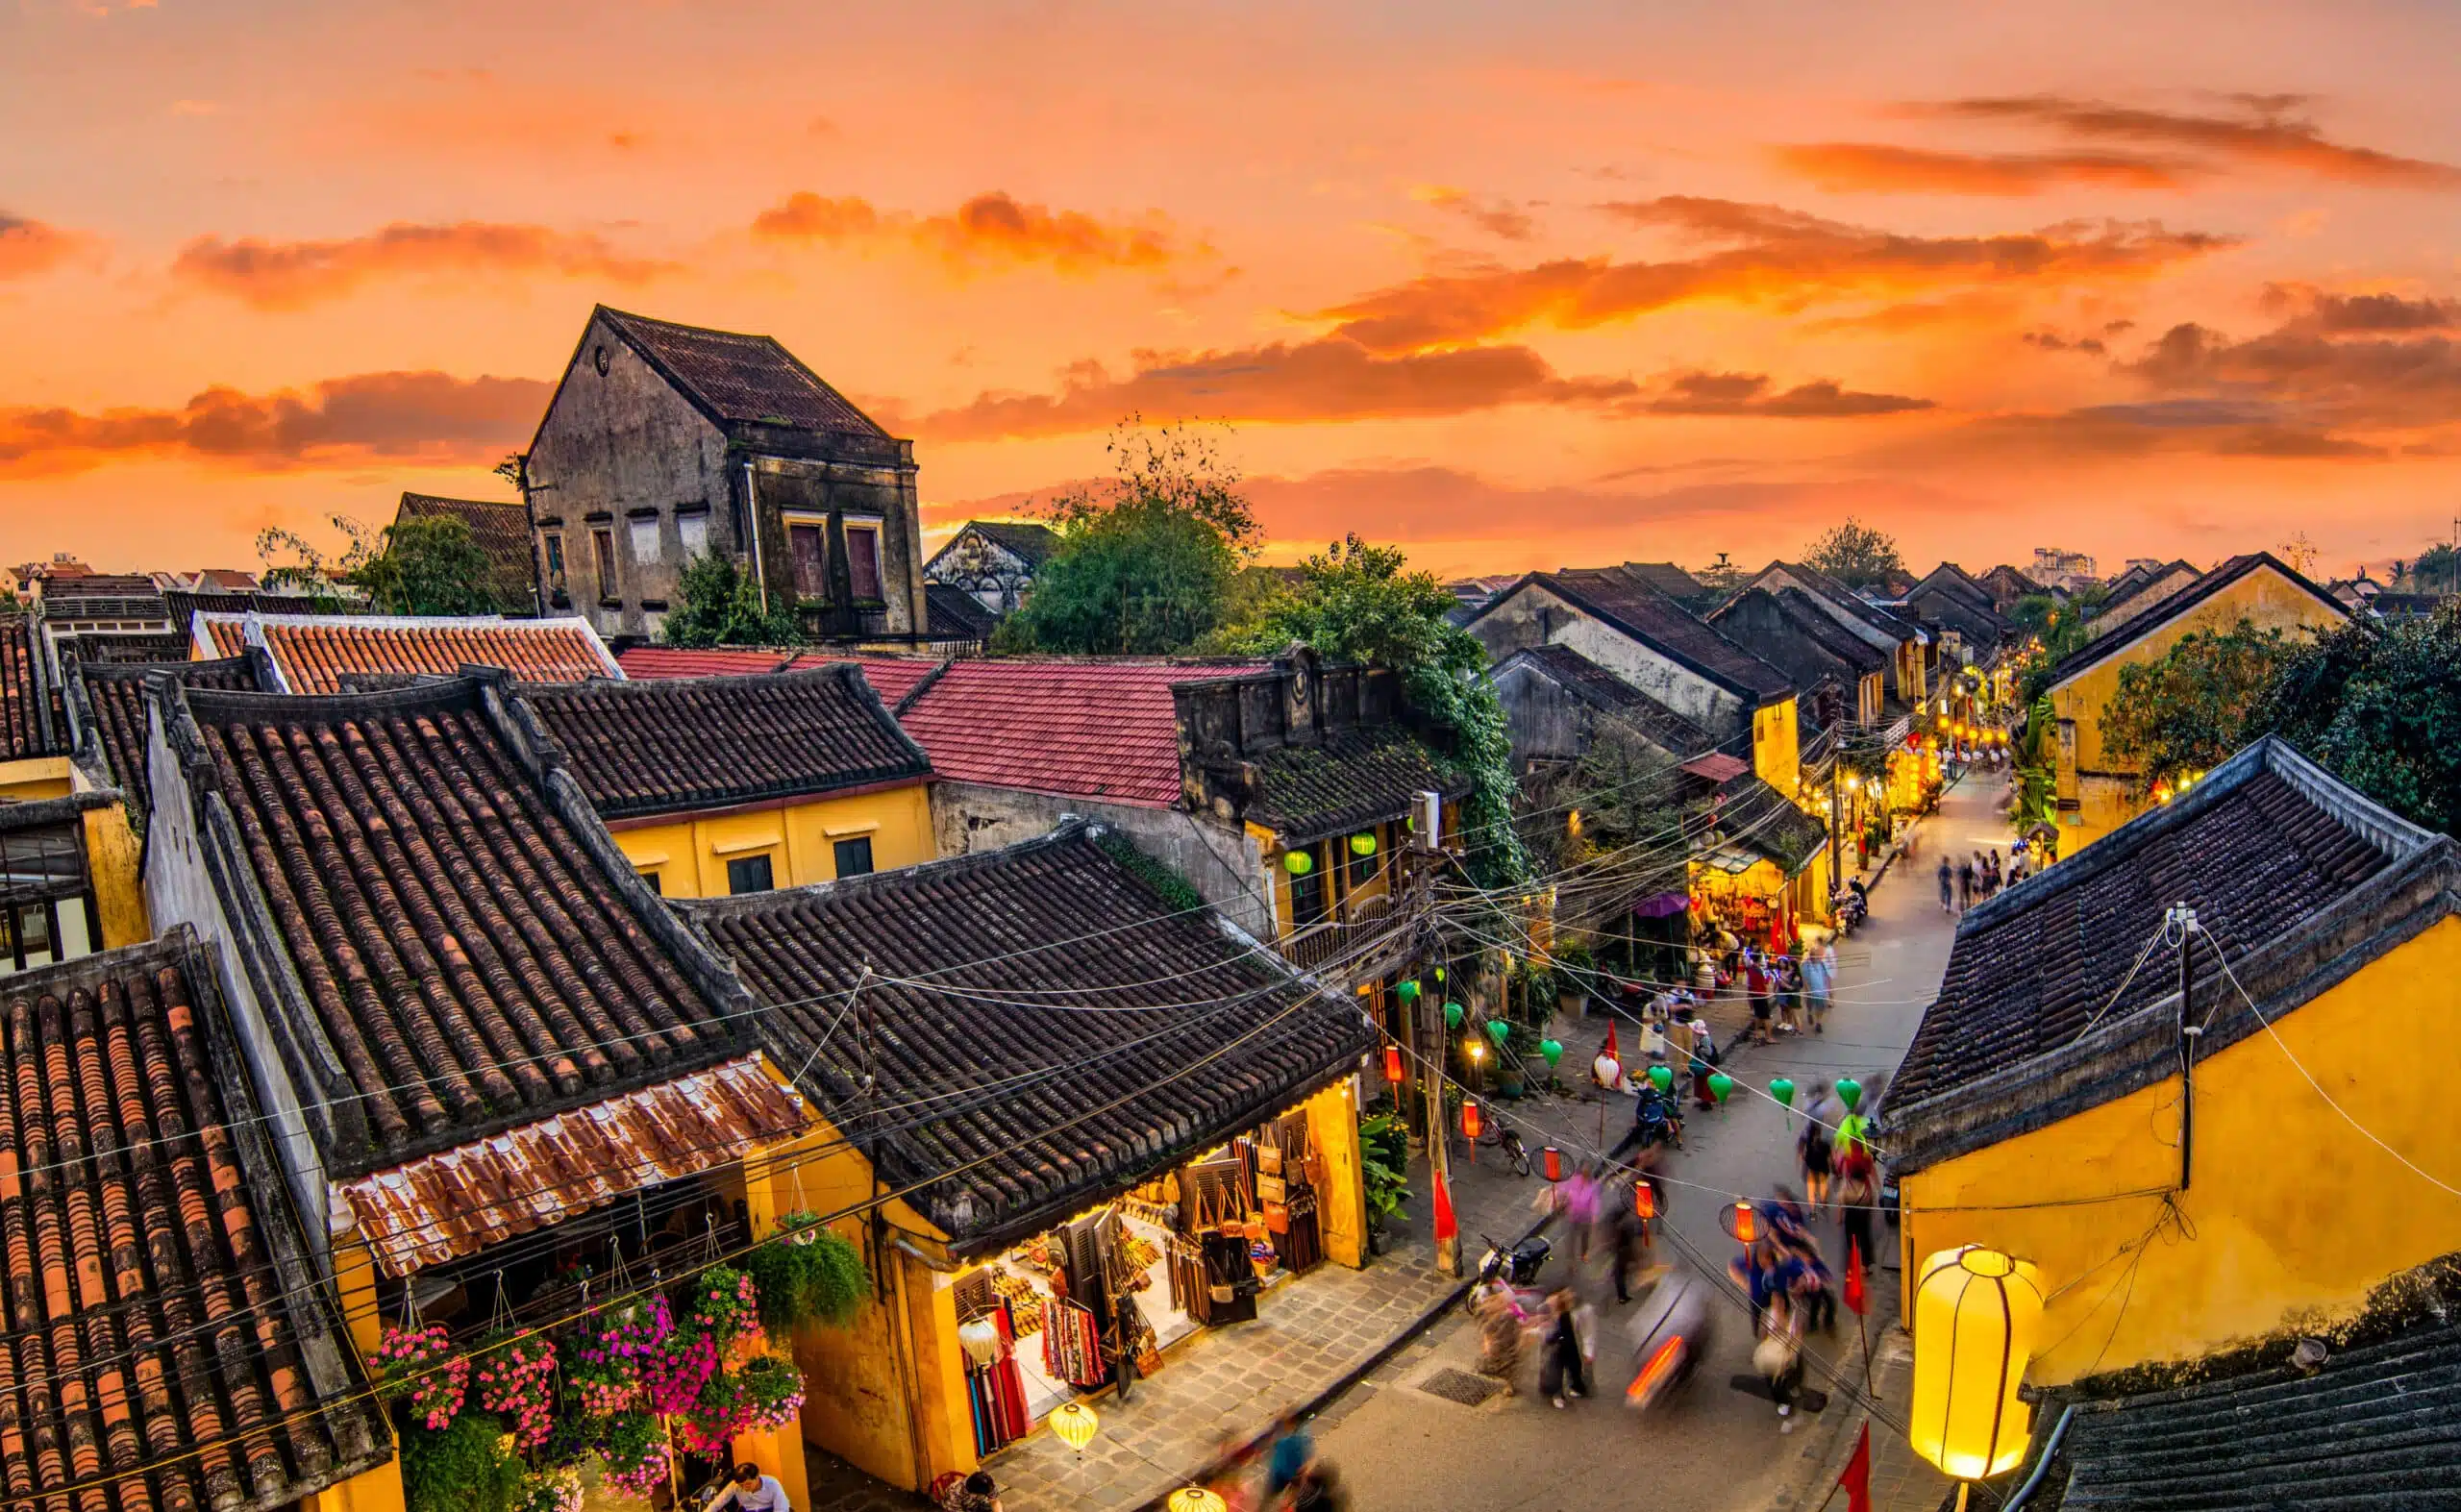 Hoi An ancient town which is a very famous tourist destination.